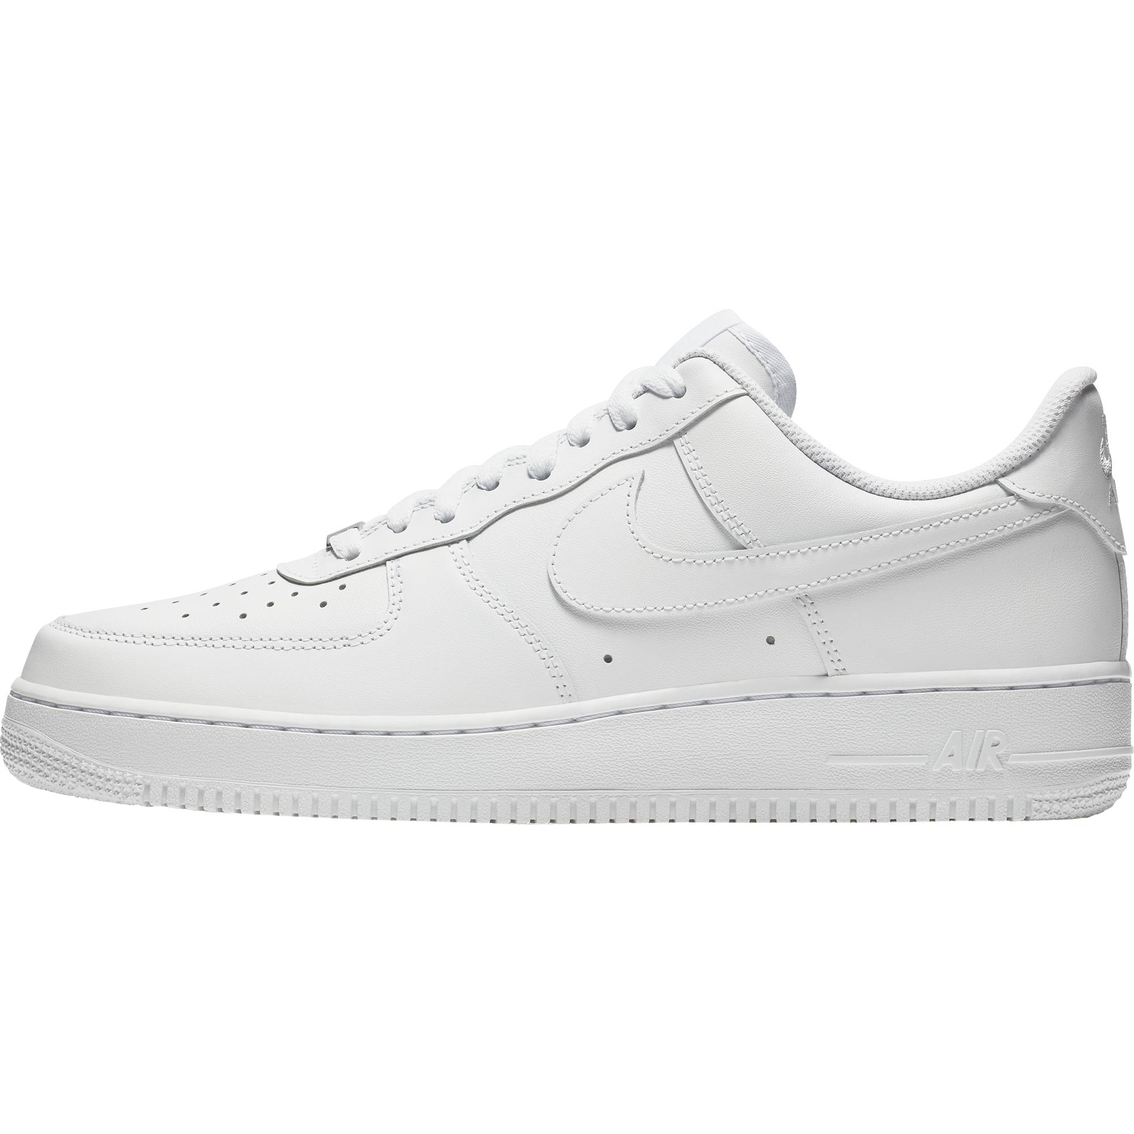 Nike Men's Air Force 1 07 Shoes - Image 2 of 8